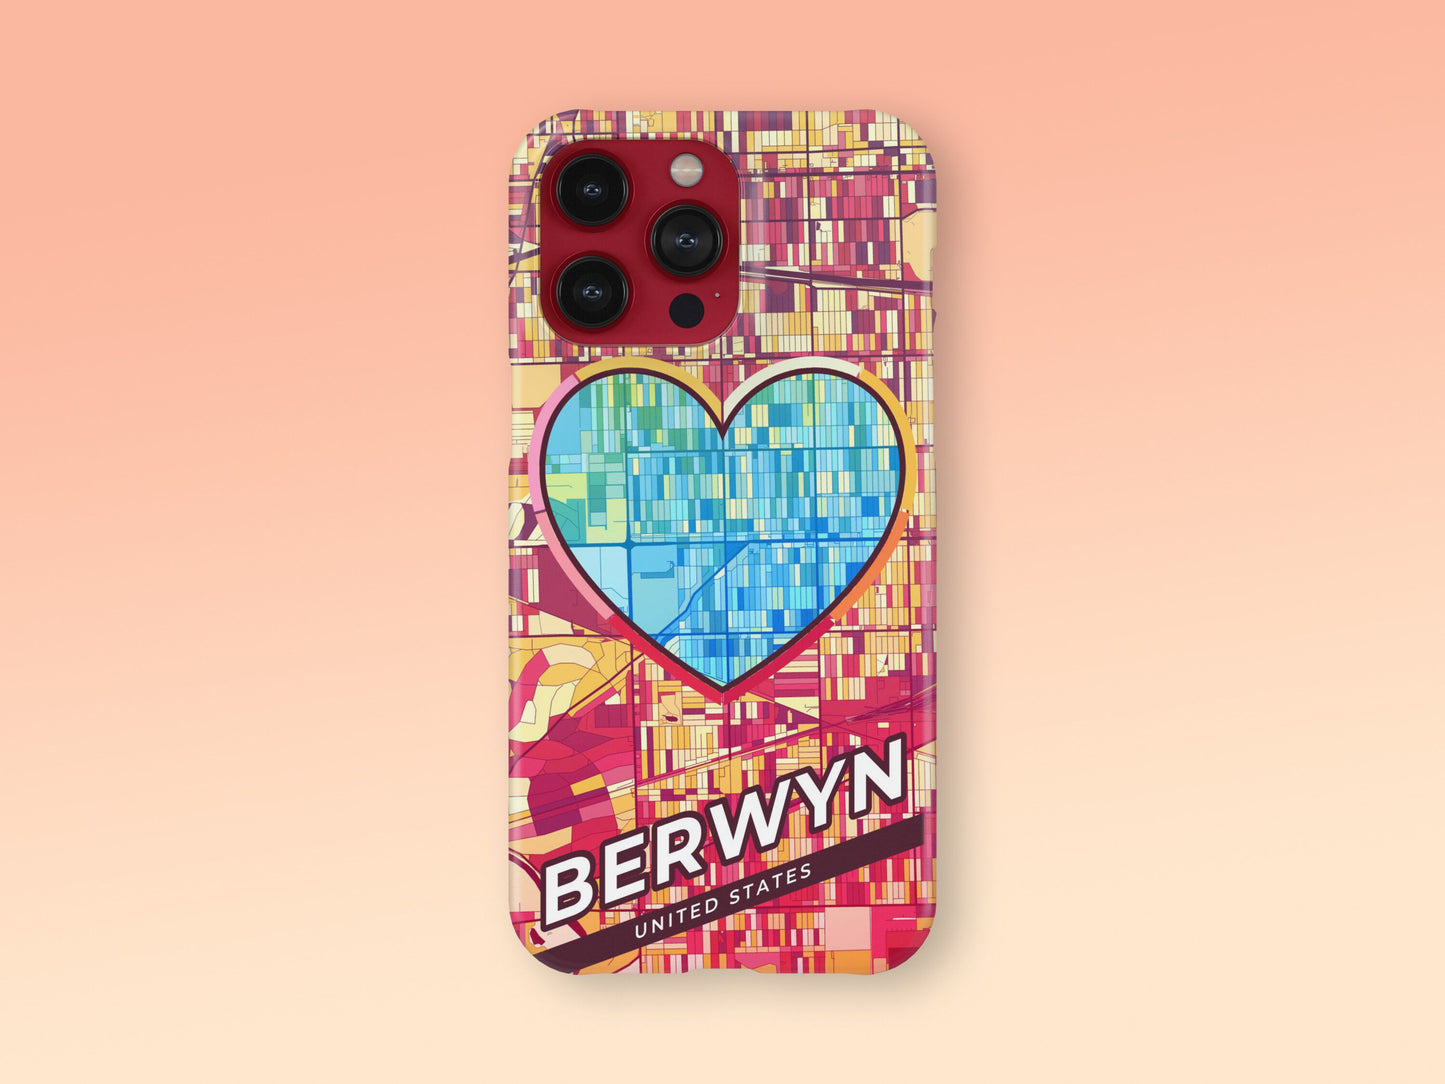 Berwyn Illinois slim phone case with colorful icon. Birthday, wedding or housewarming gift. Couple match cases. 2